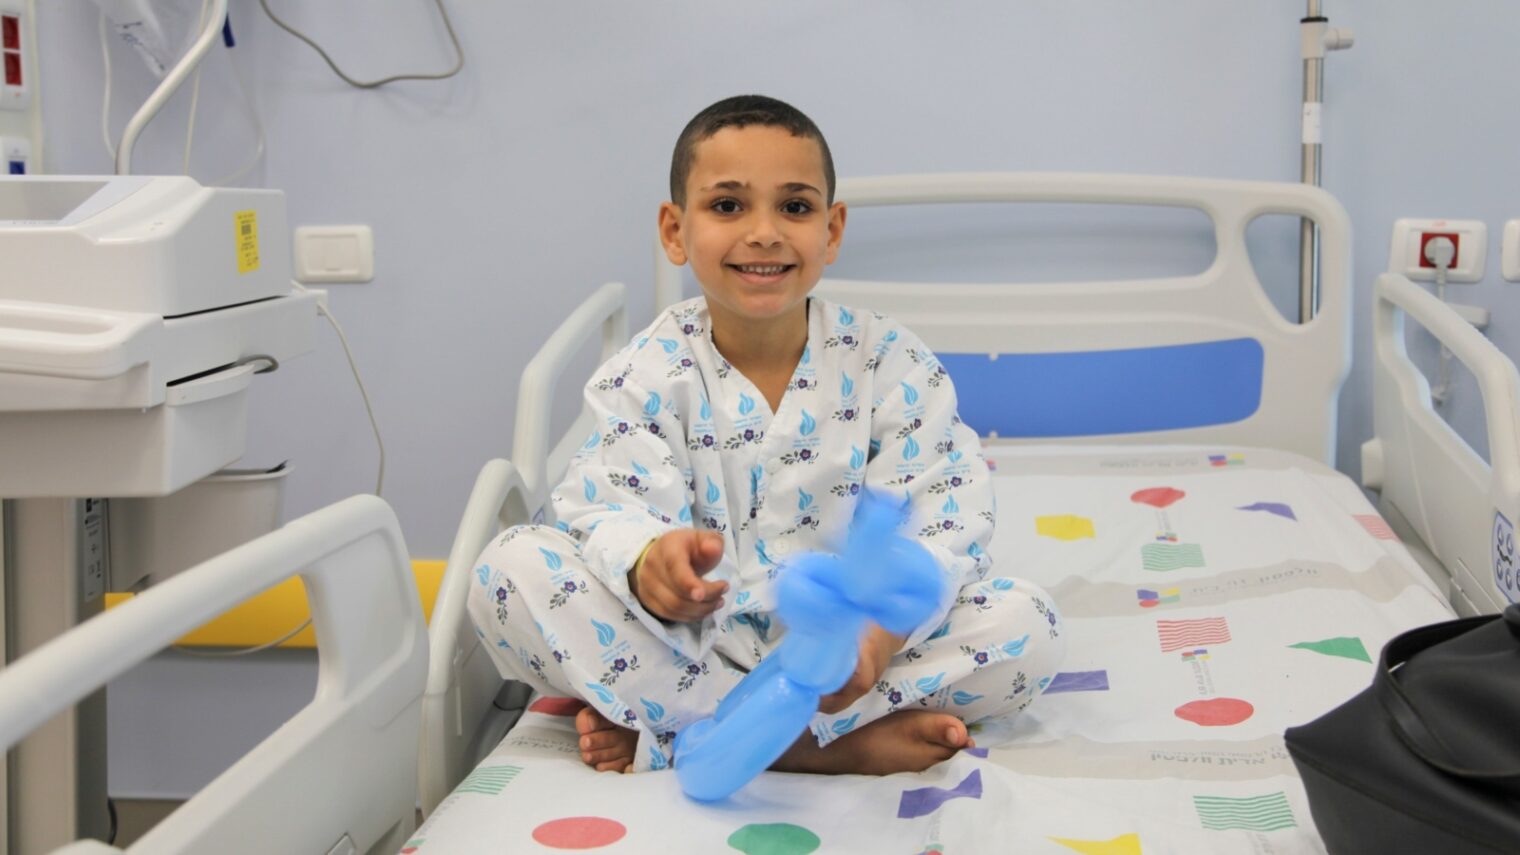 Amir Yichya Mabchuch, 5, was the 3,000th patient from Gaza and the Palestinian Authority territories to be treated at Save a Child’s Heart in Holon, Israel. Photo courtesy of SACH